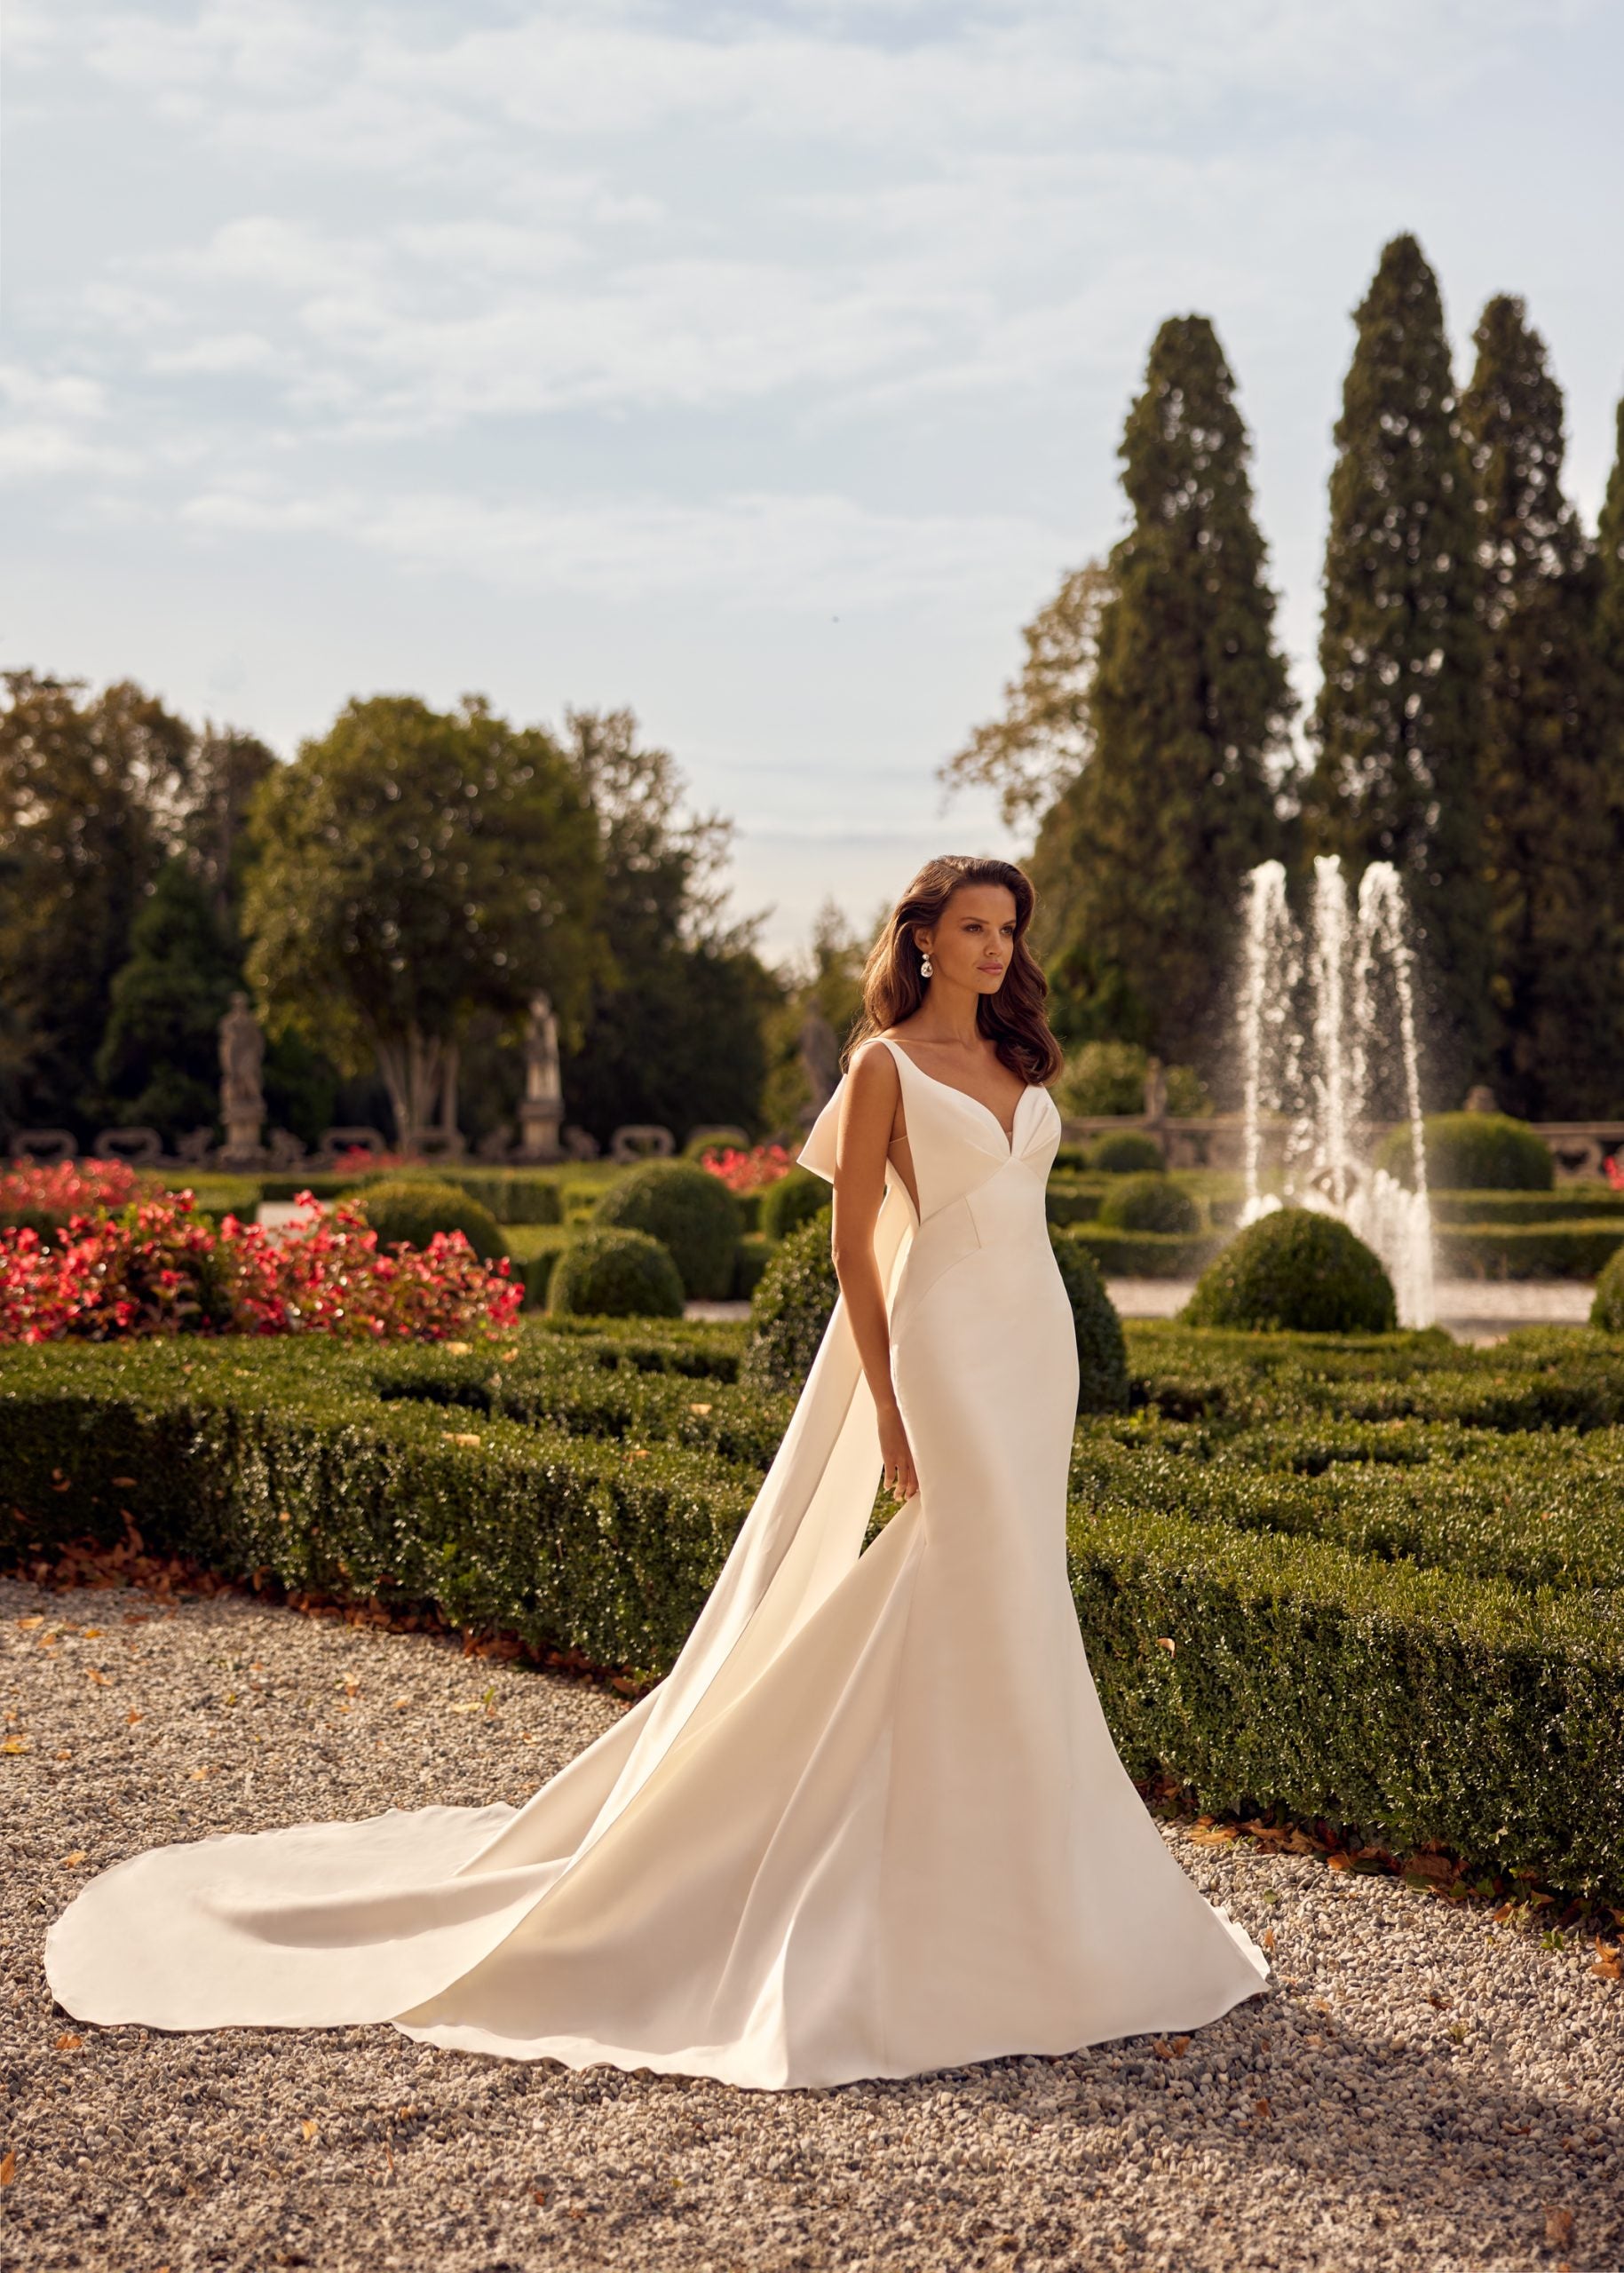 Chic And Simple V-Neck Fit-and-Flare Gown With Bow by Randy Fenoli - Image 1